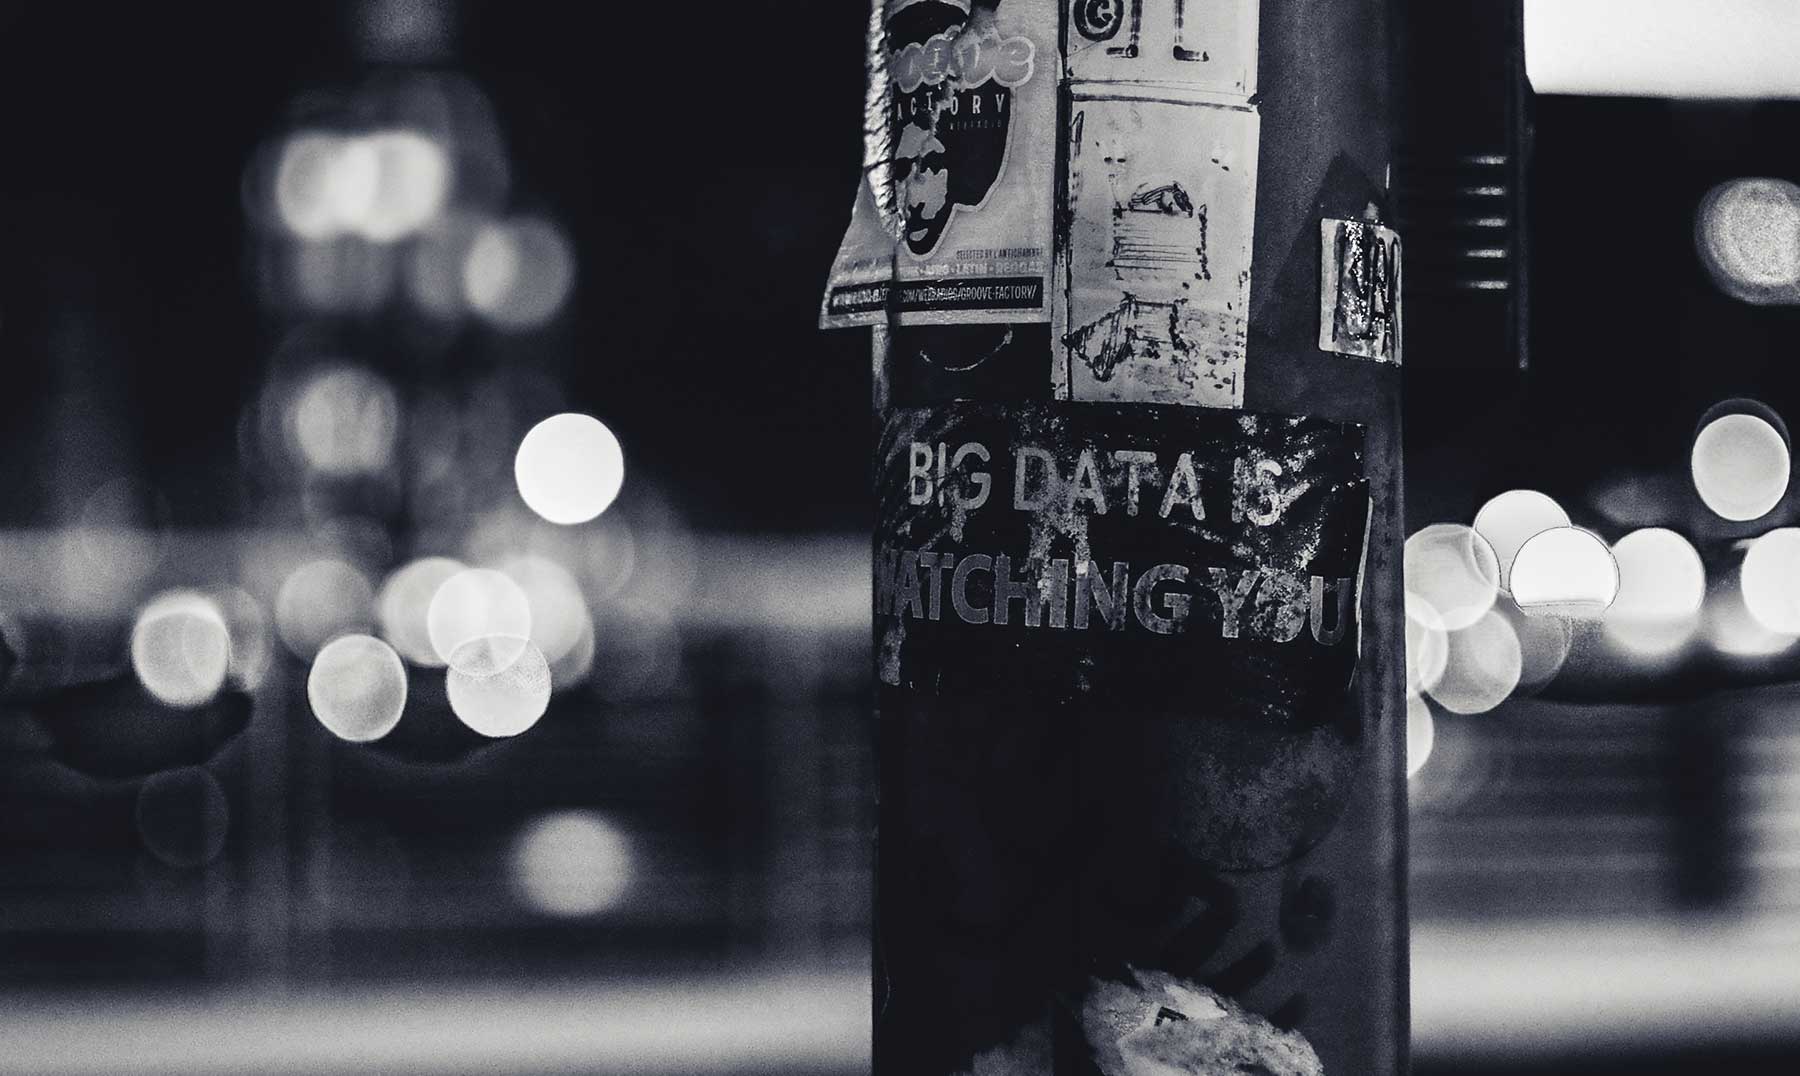 night time, city lights in the background, at night, showing a telephone post with text saying 'big data is watching you'